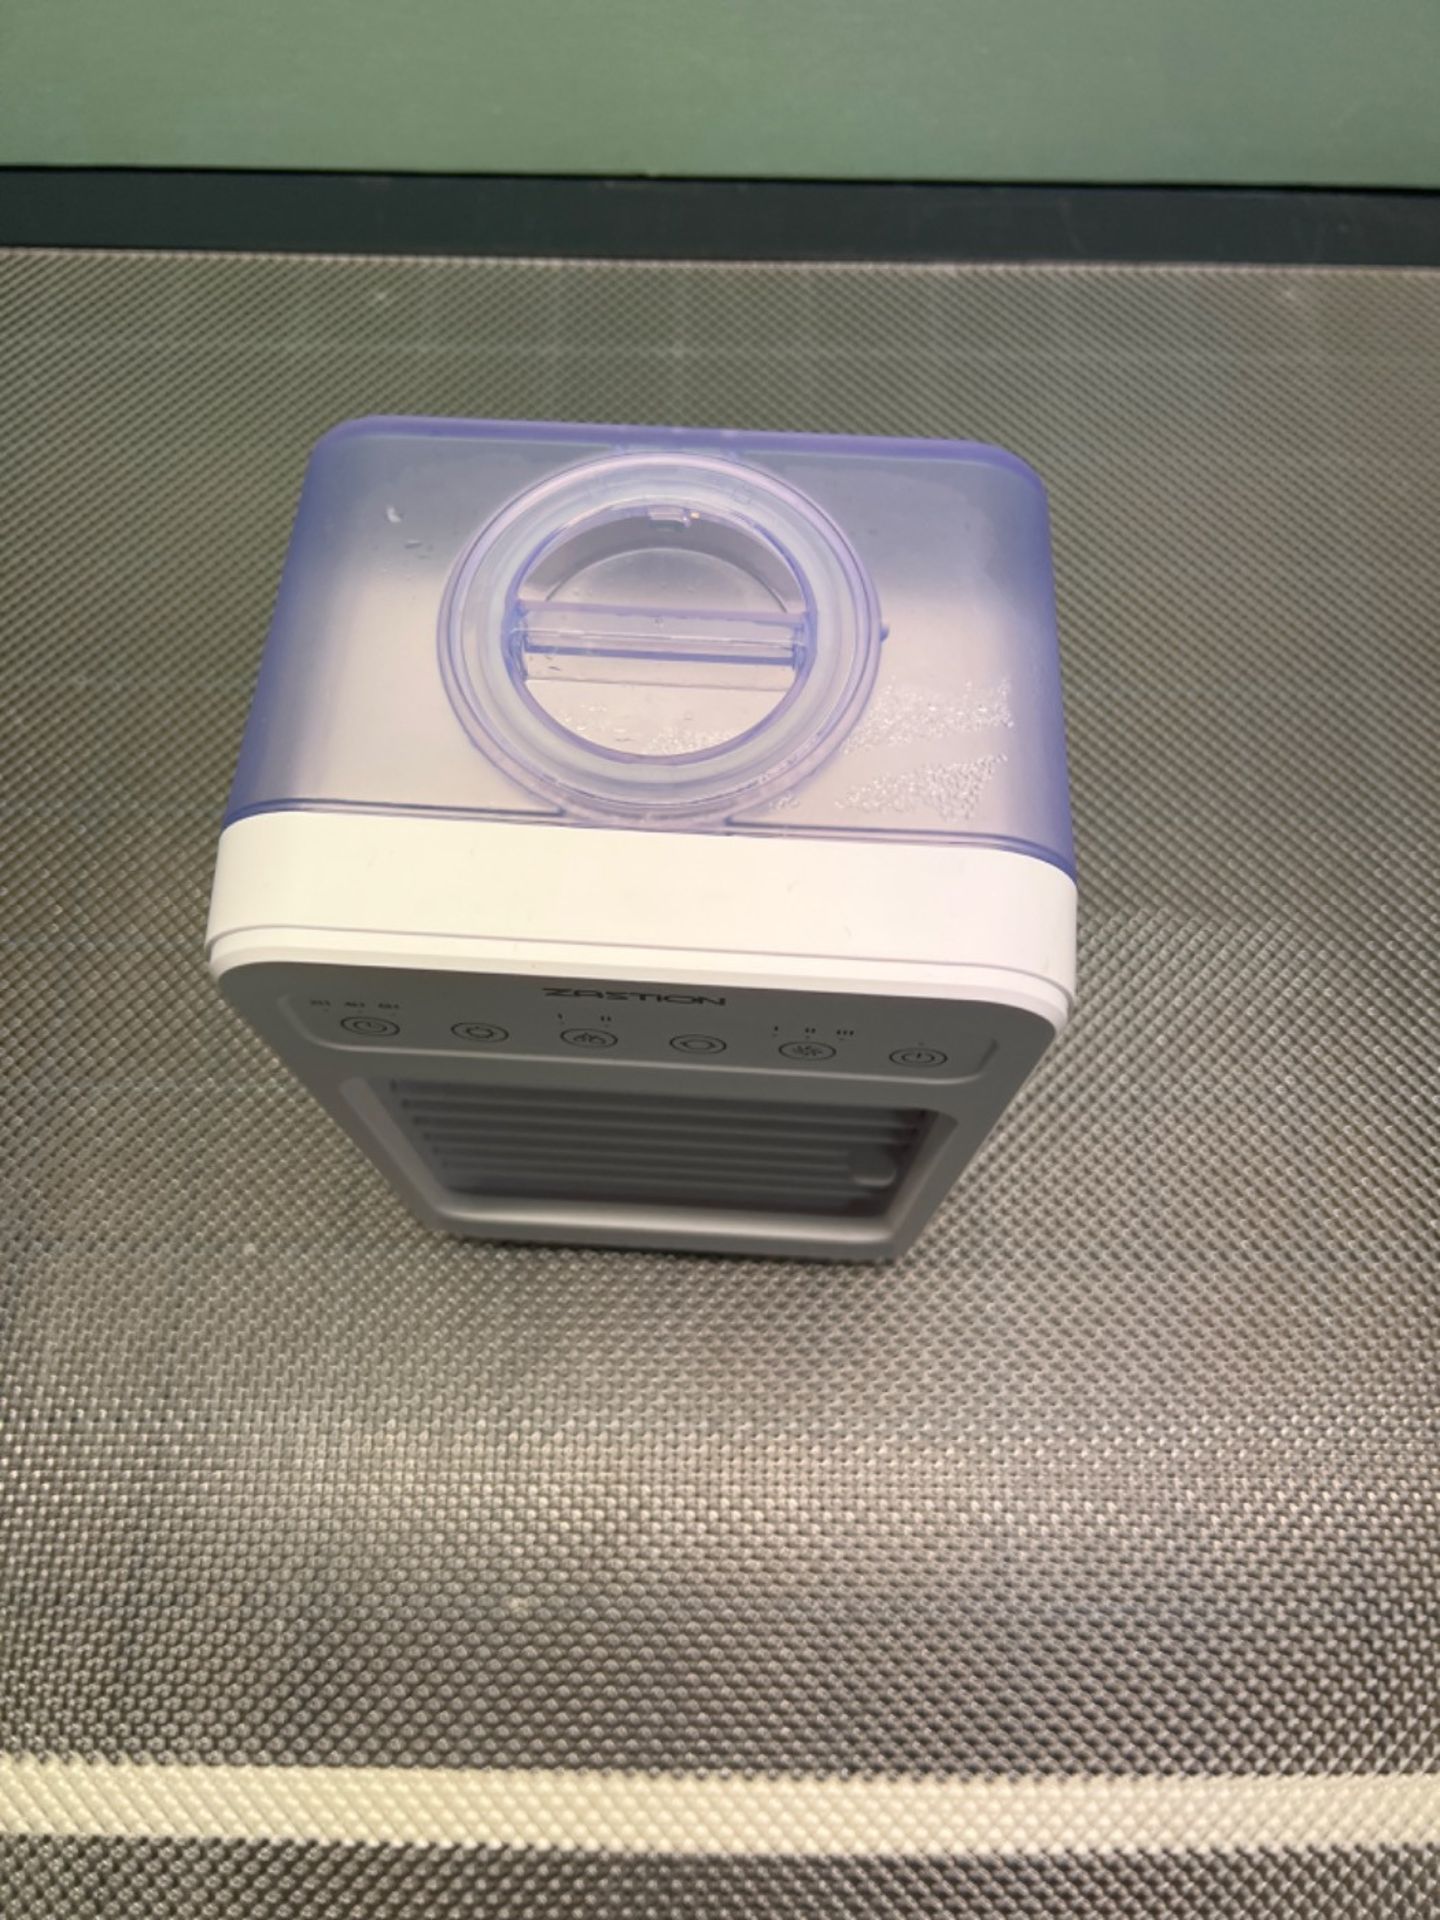 Air Coolers for Home, ZASTION Portable Air Conditioner 4 in 1 Mini Evaporative Cooler with 4 Wind S - Image 3 of 3